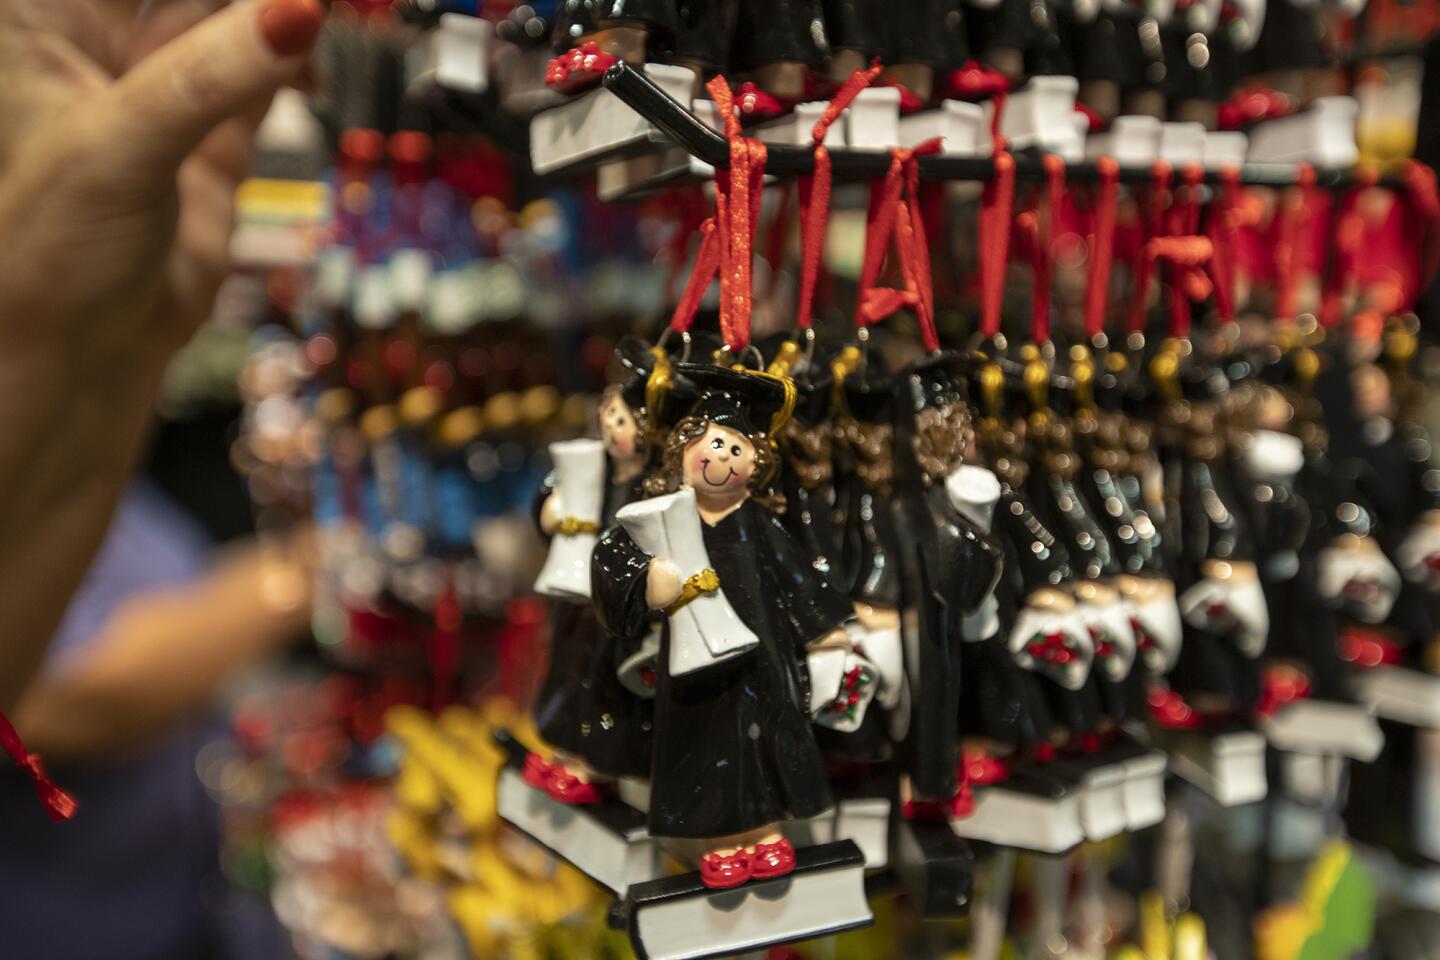 Graduate ornaments are one of the many arts and crafts items for sale at the Harvest Festival at the OC Fair & Event Center.